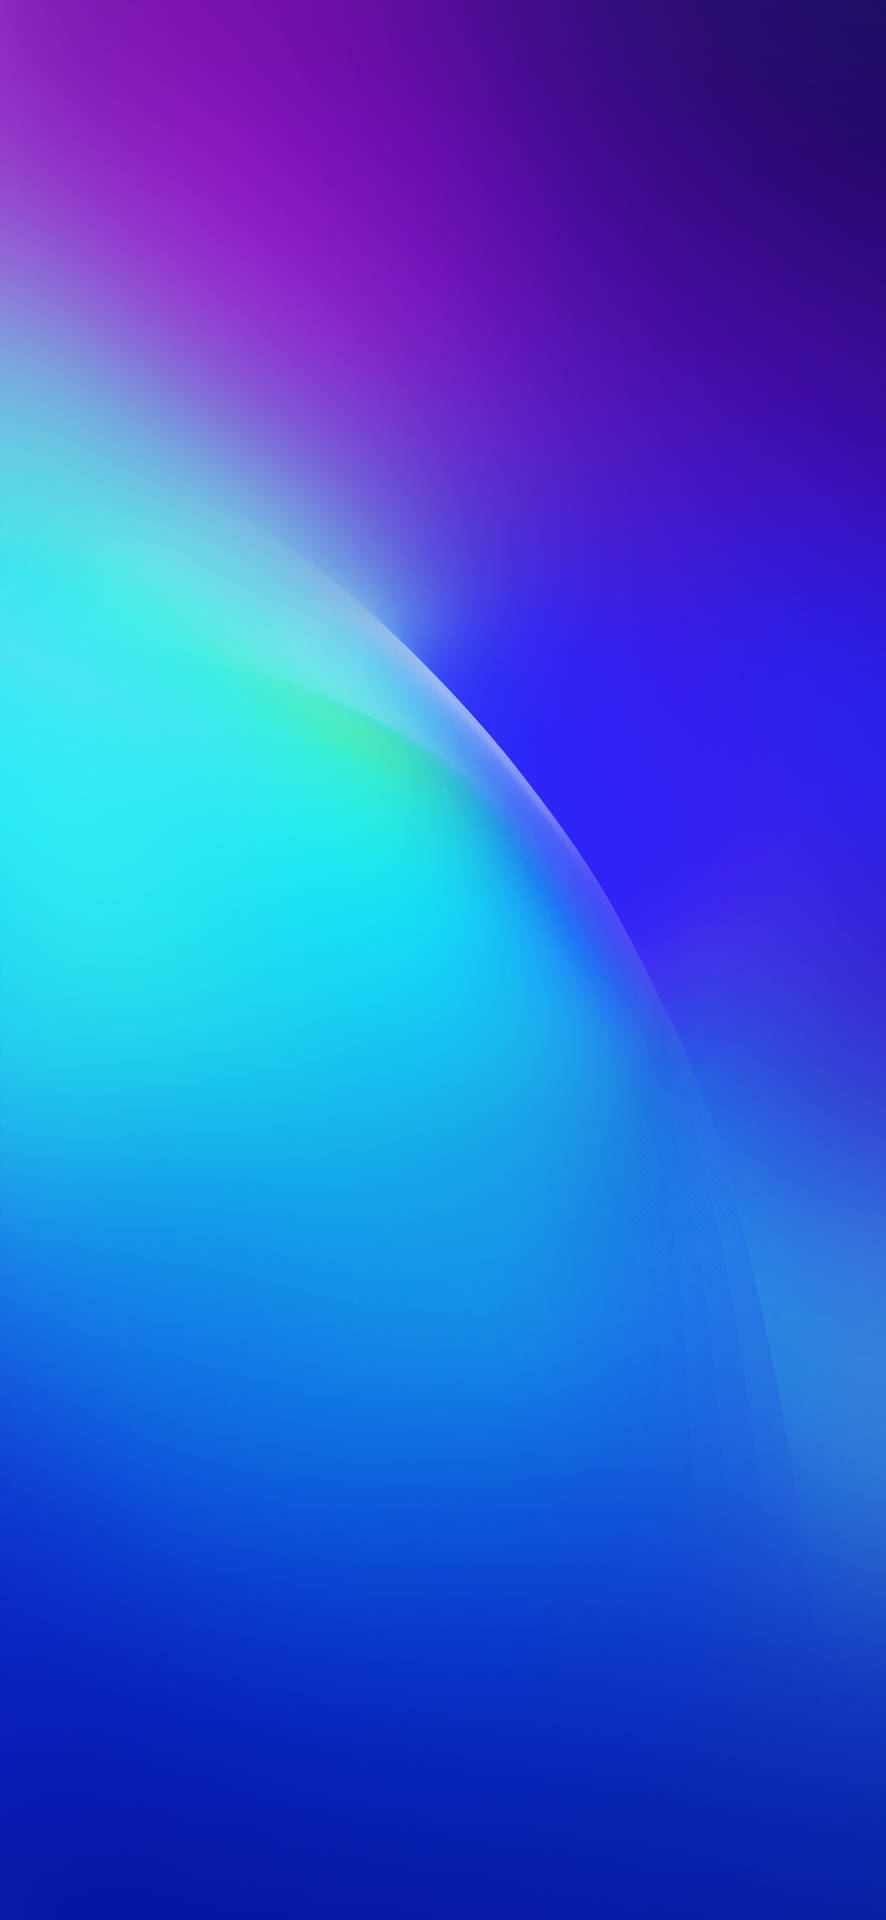 Abstract Violet Blue Gradient Oppo A5s Wallpaper